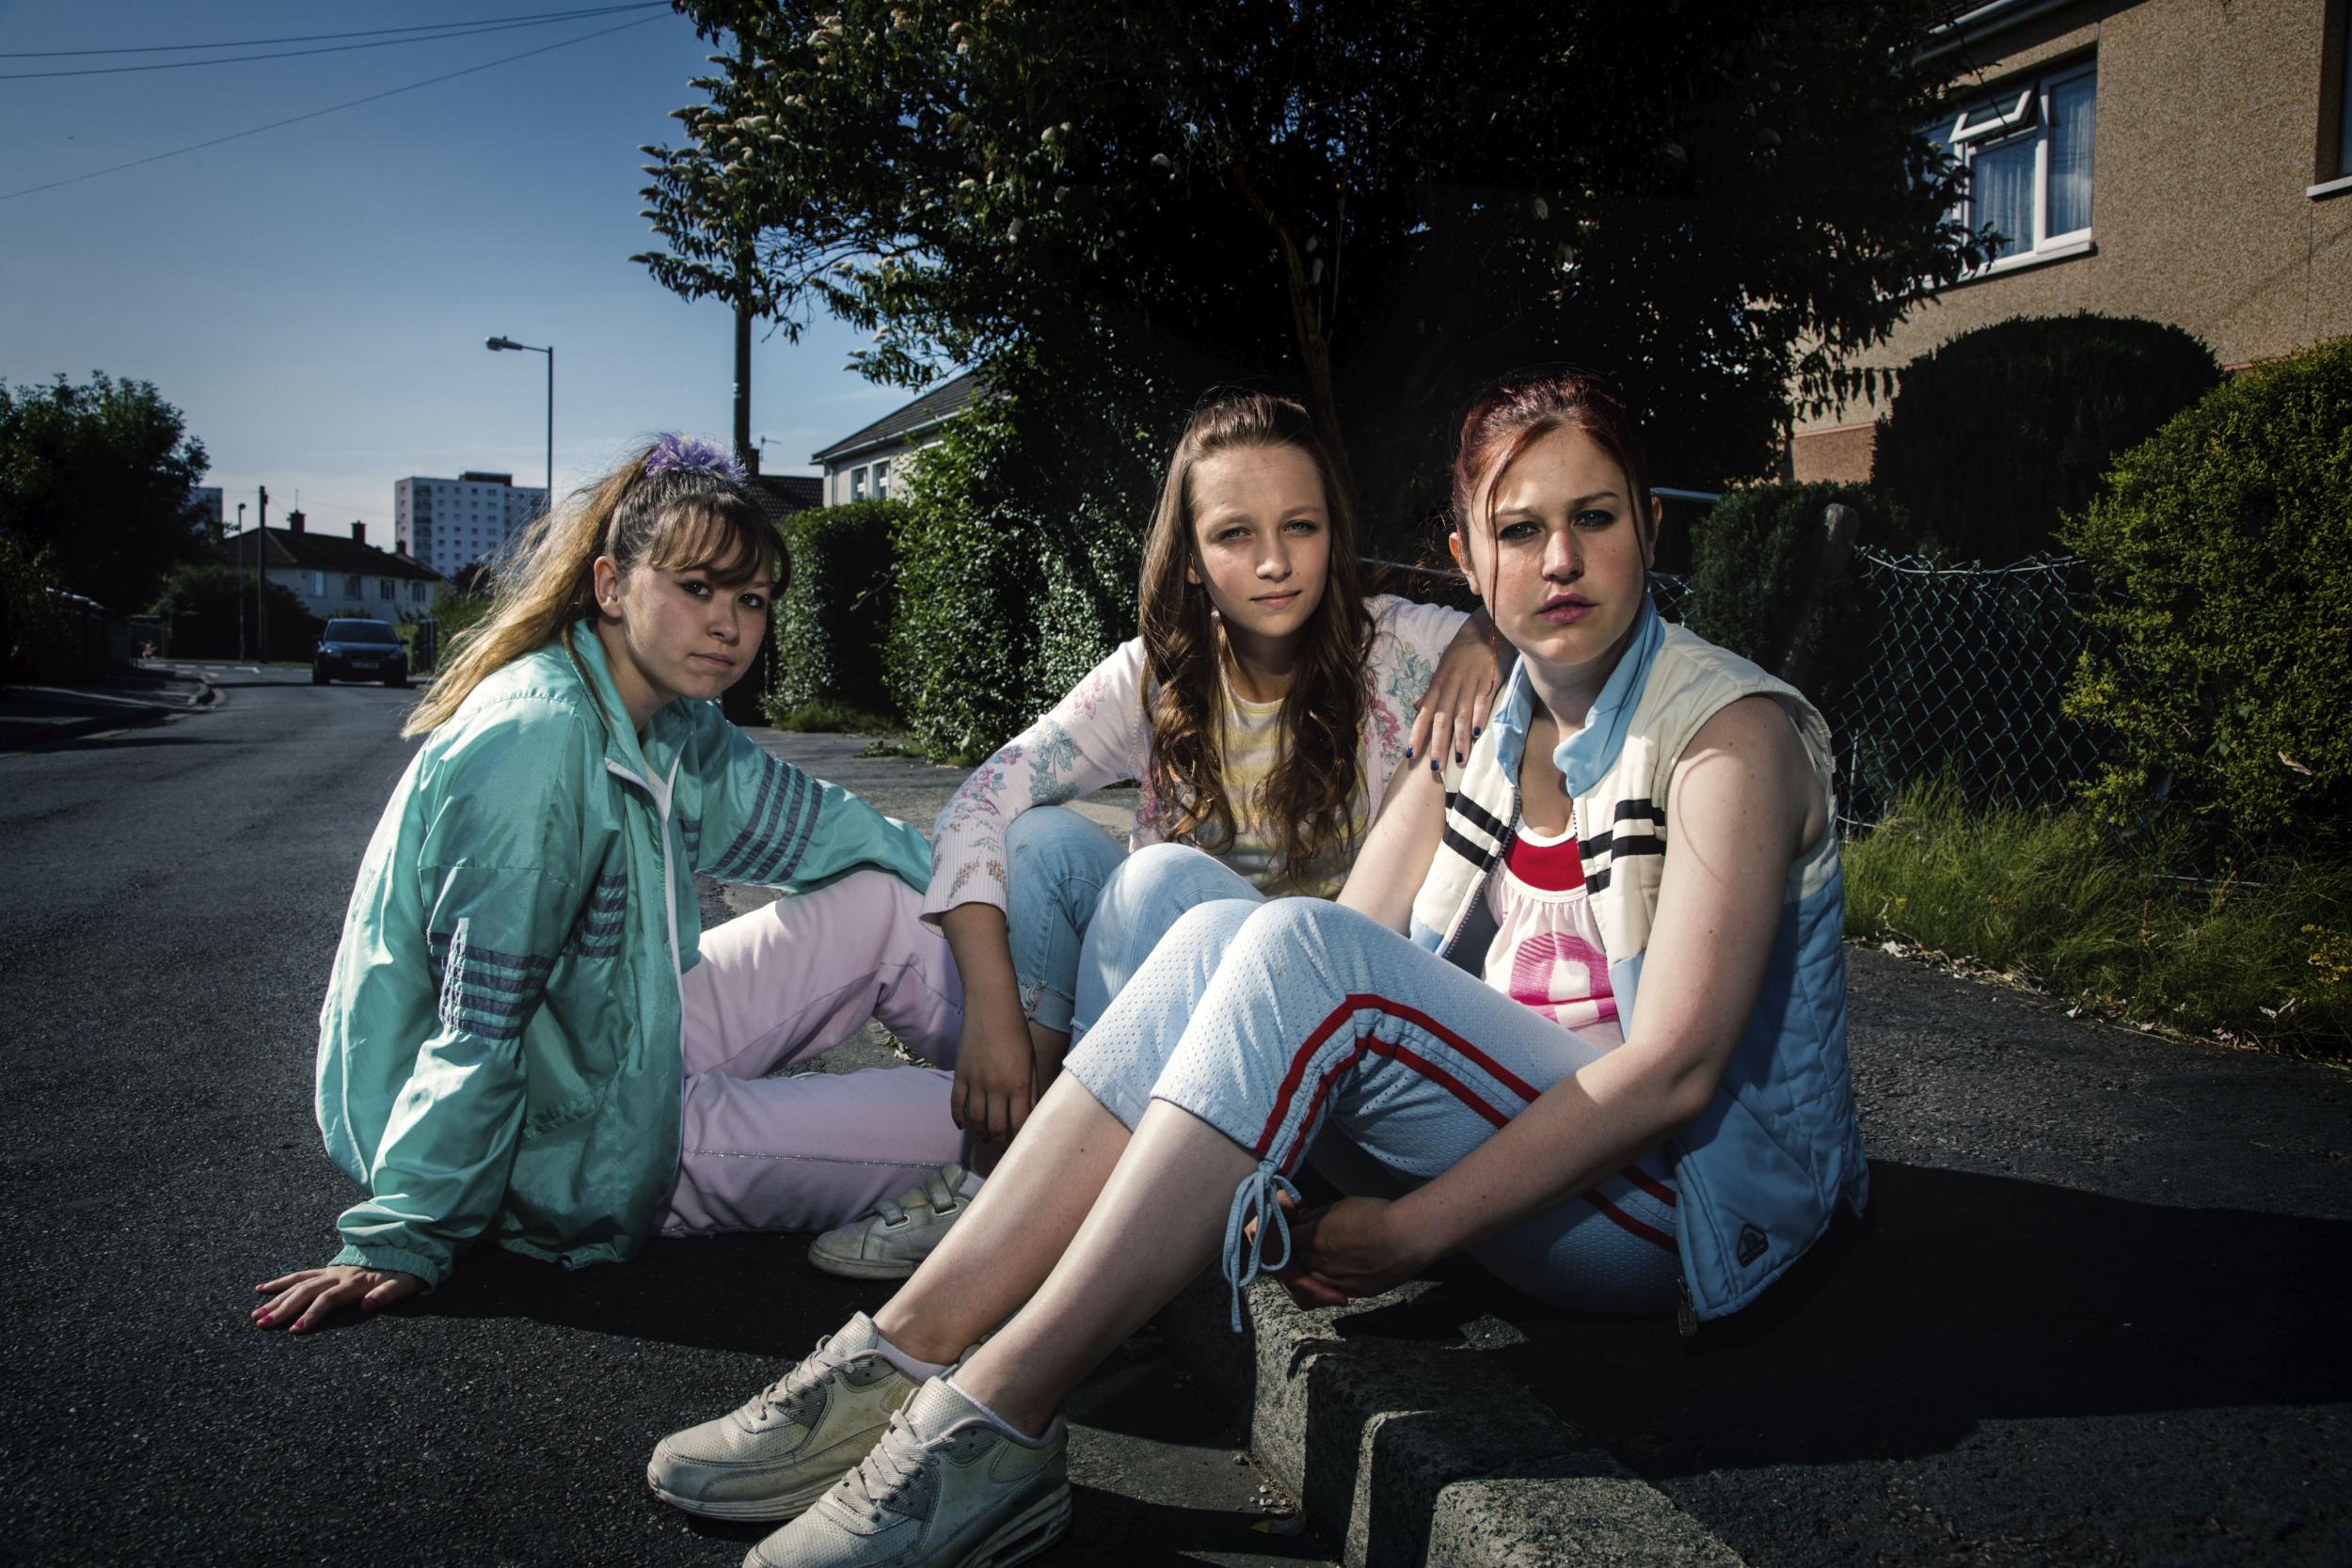 The new show tells the story of three girls – Ruby (Liv Hill), Holly (Molly Windsor) and Amber (Ria Zmitrowicz) – who were groomed and sexually assaulted by a group of predatory men